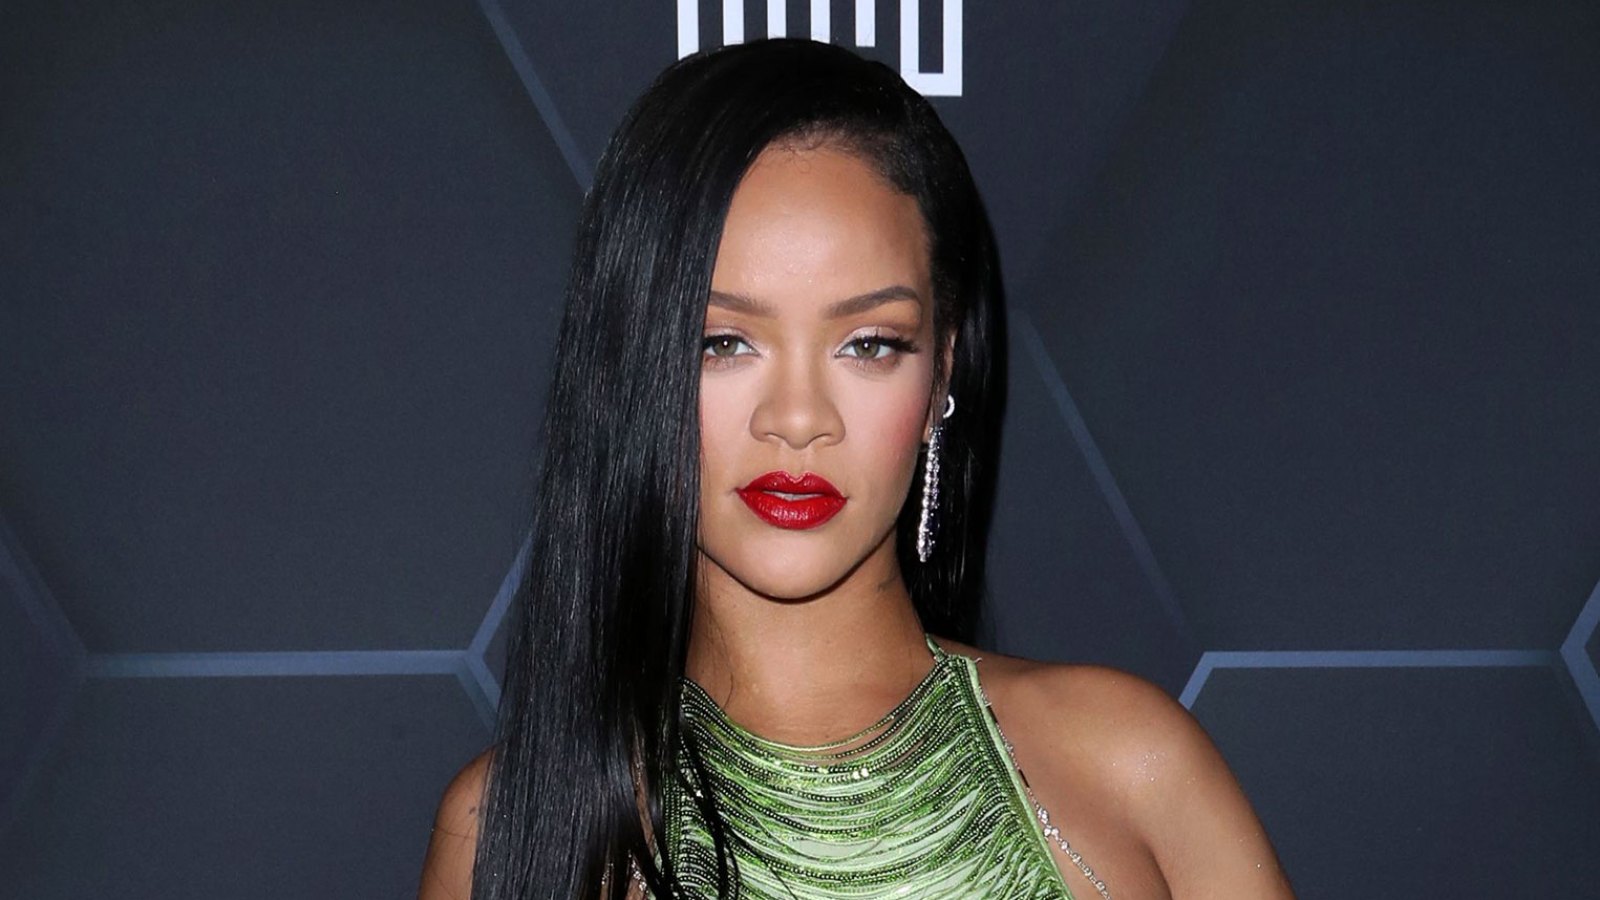 Pregnant Rihannas Bump Baring Outfit at the Gucci Fashion Show Has Us Speechless